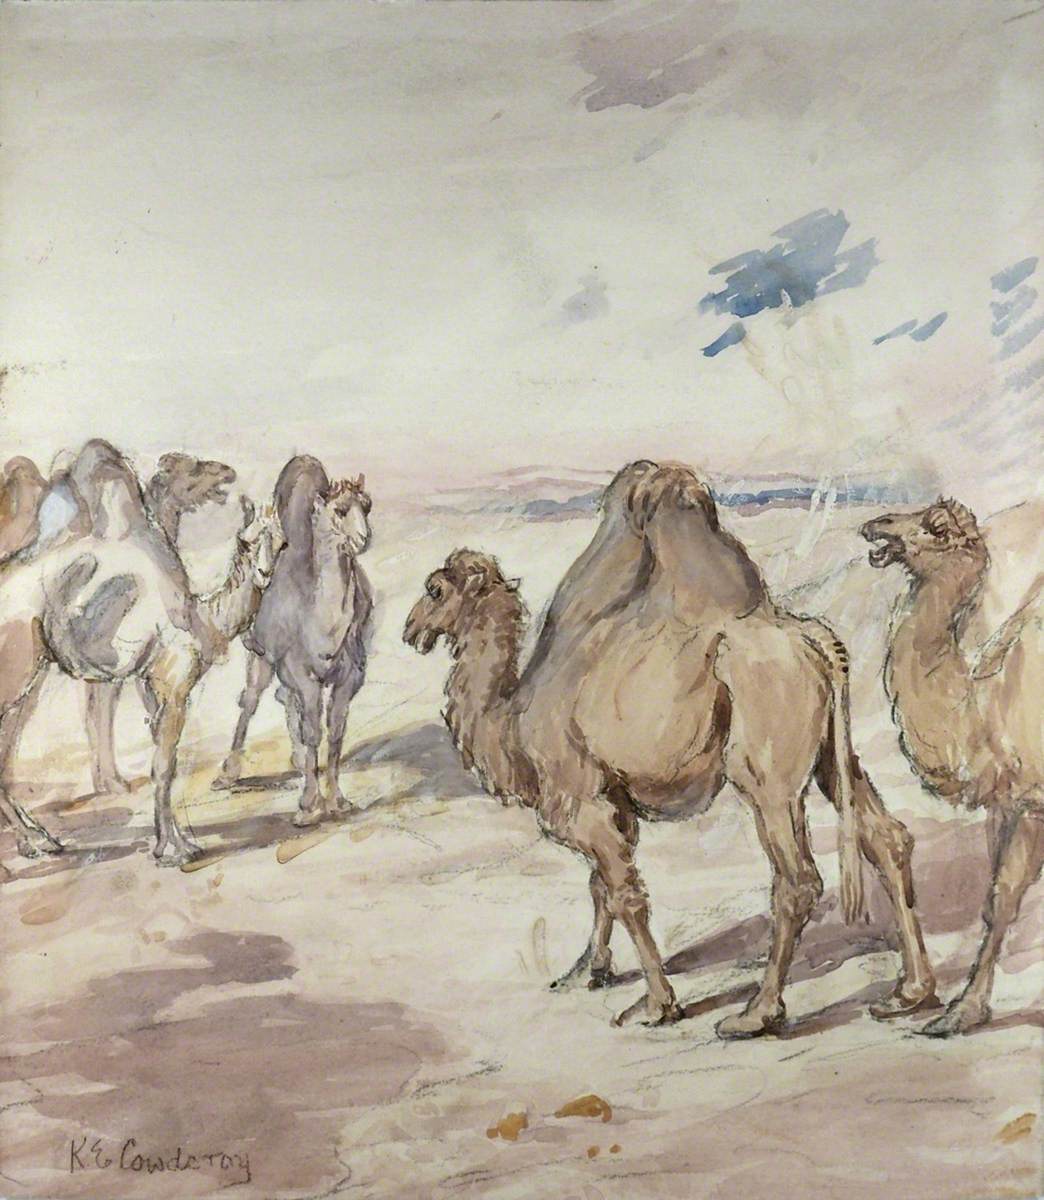 A nod to Edward I who brought a Camel to Chenies Manor in 1290 for #onlineartexchange which celebrates Egypt for #CreaturesOfTheNile at @victoriagallery curated by @GarstangMuseum 📷 Camels Kate Ethel Cowderoy @BusheyMuseum